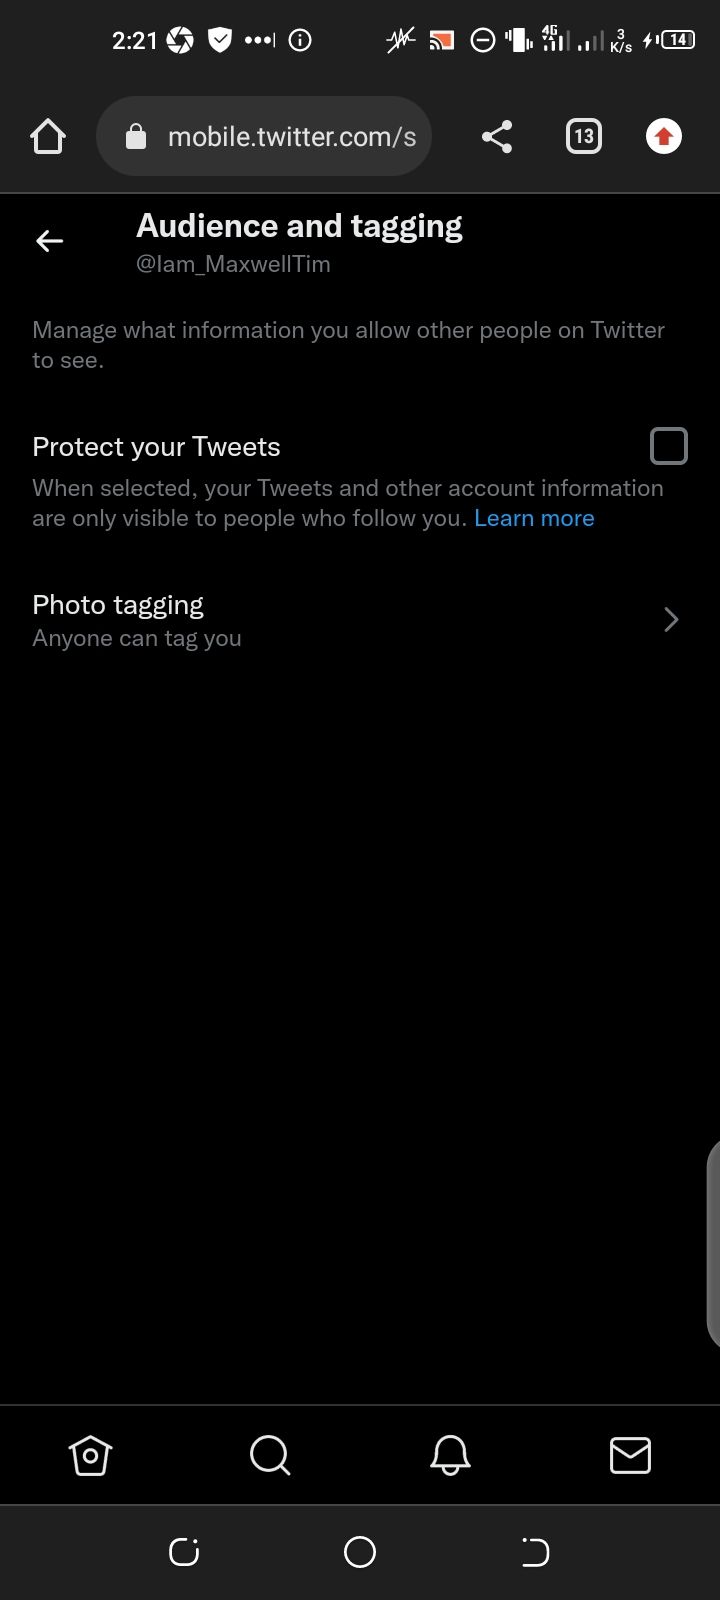 How to protect your tweets on Twitter 